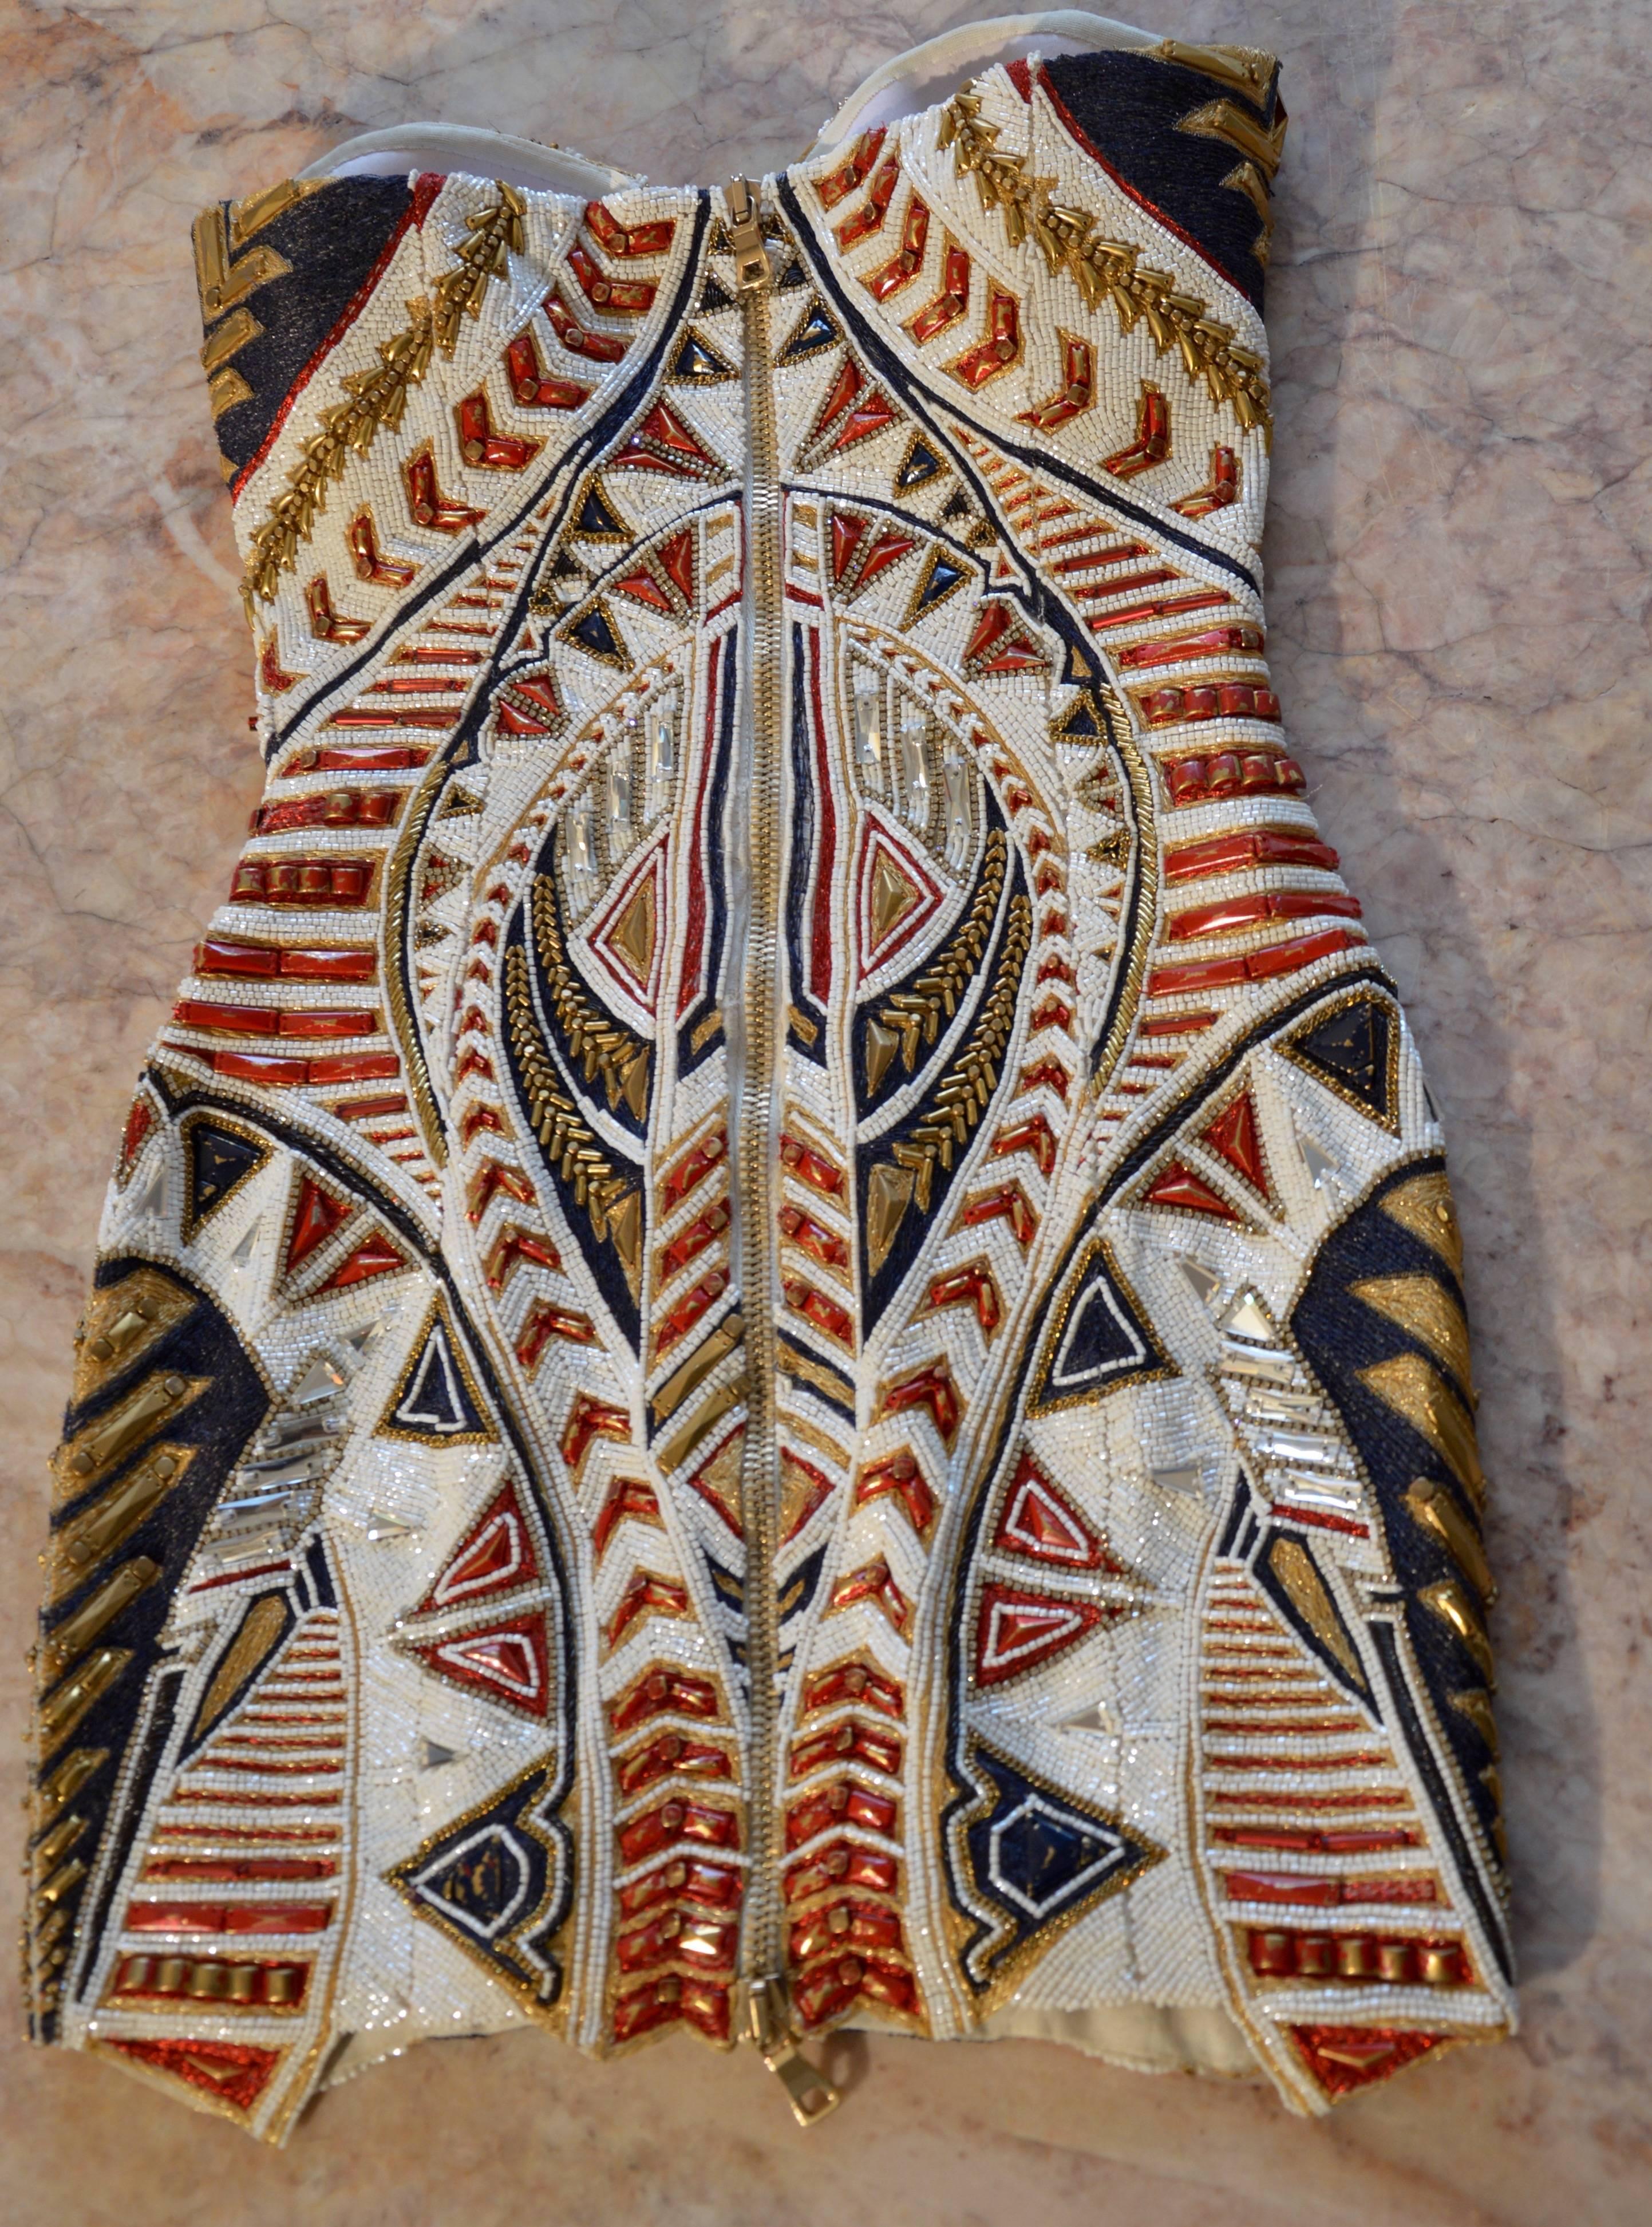 Brown Unique Balmain Olivier Rousteing Body-Molding Mexican-style Embroidered Dress